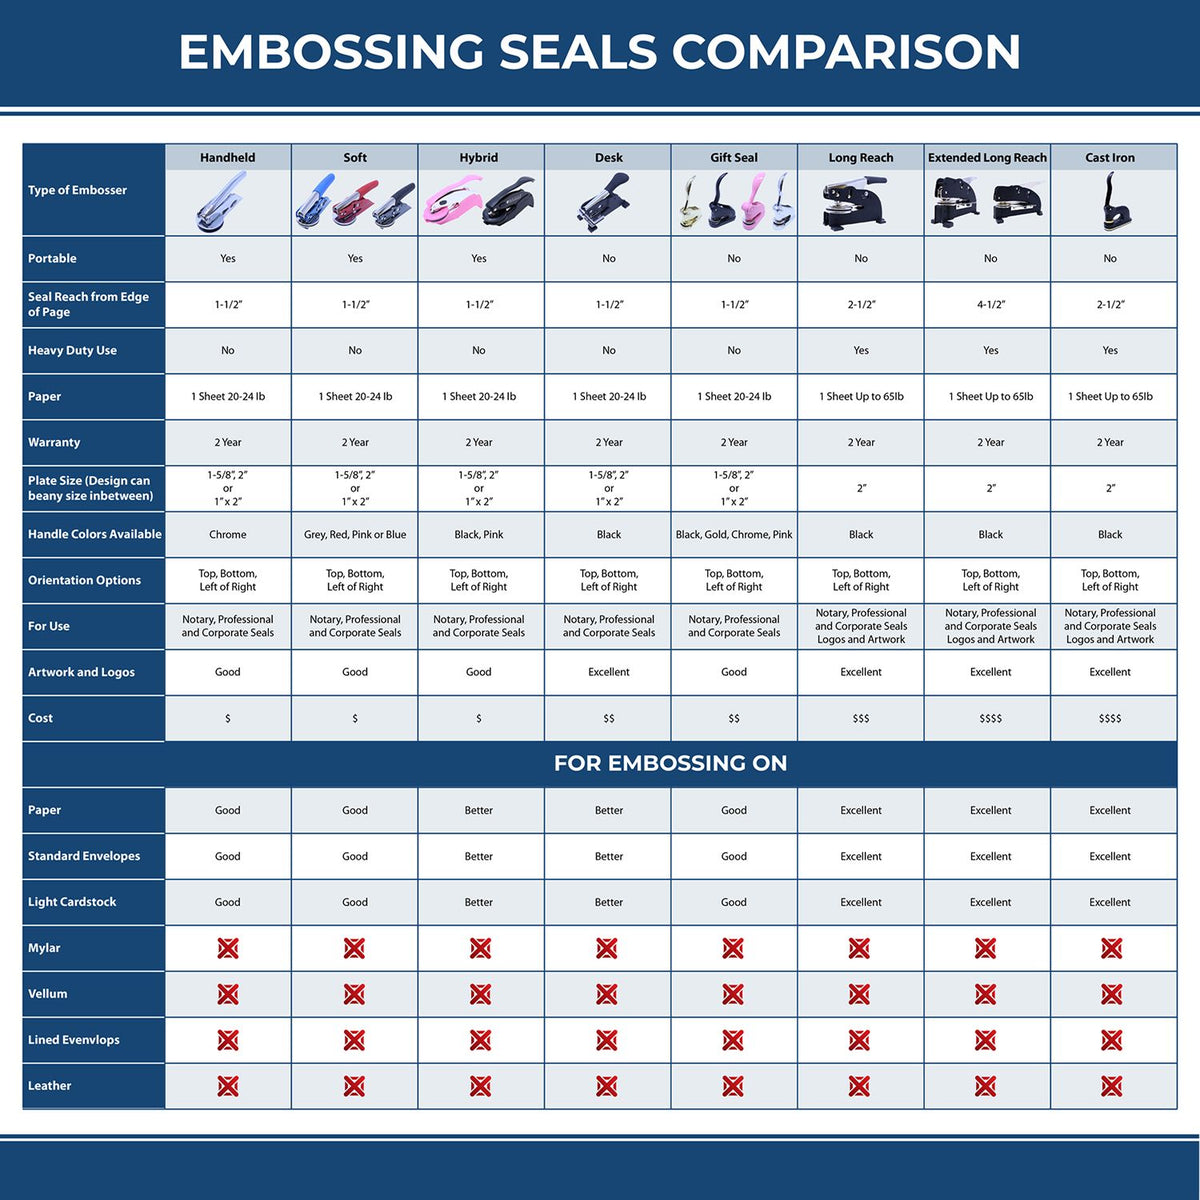 A comparison chart for the different types of mount models available for the Handheld Montana Professional Engineer Embosser.